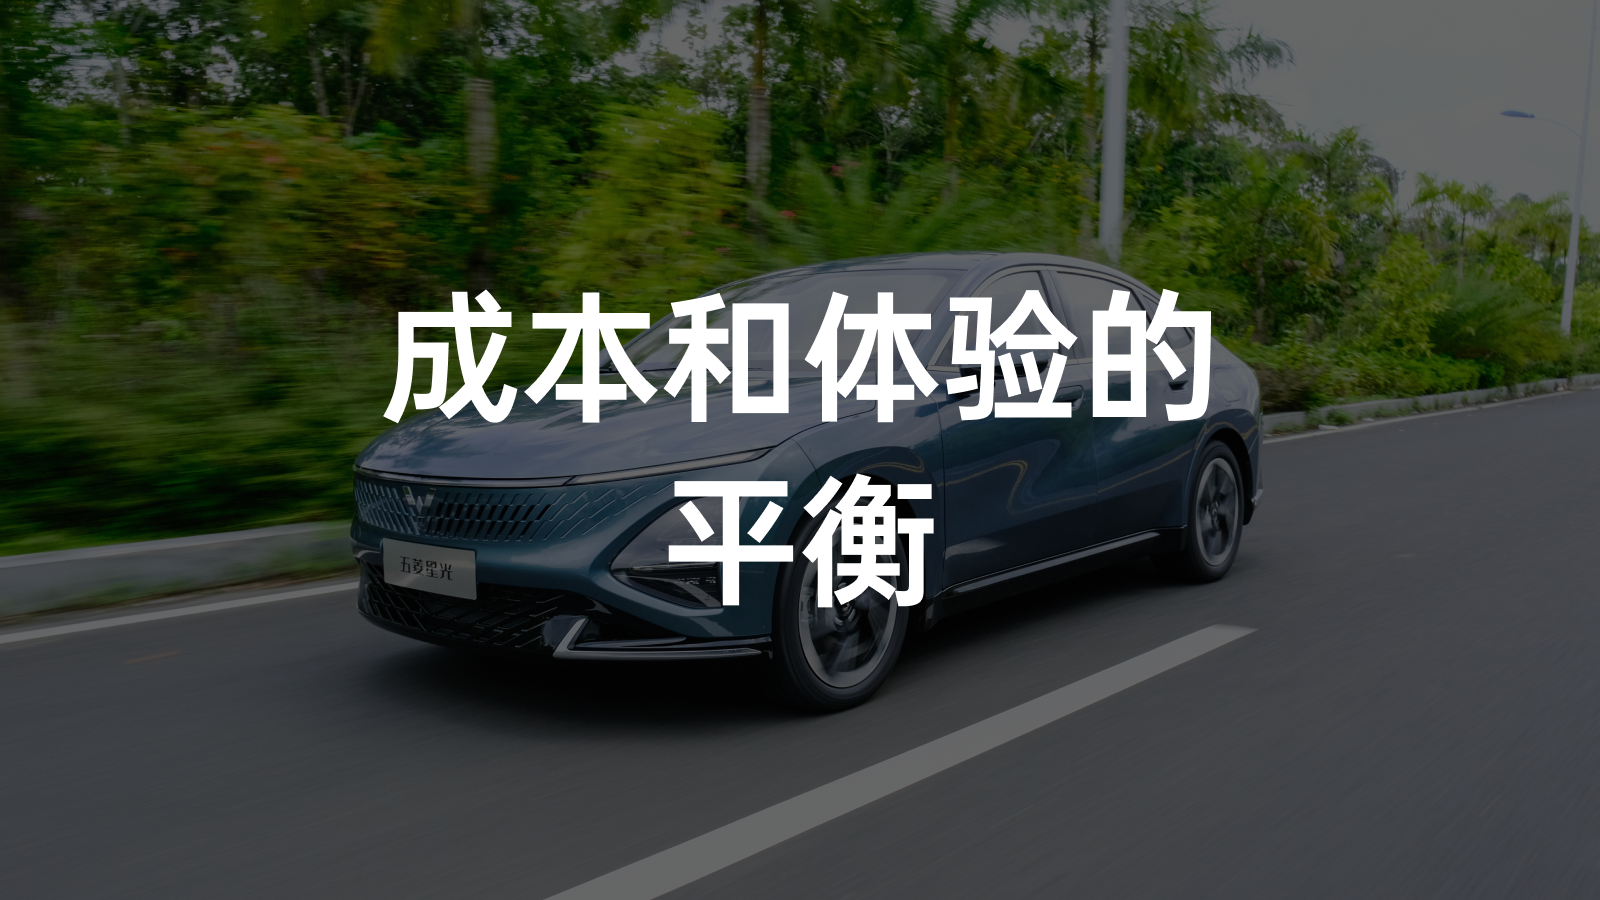 How Does Starlight, Priced Under 100,000 RMB, Stand Up Against BYD Qin PLUS?